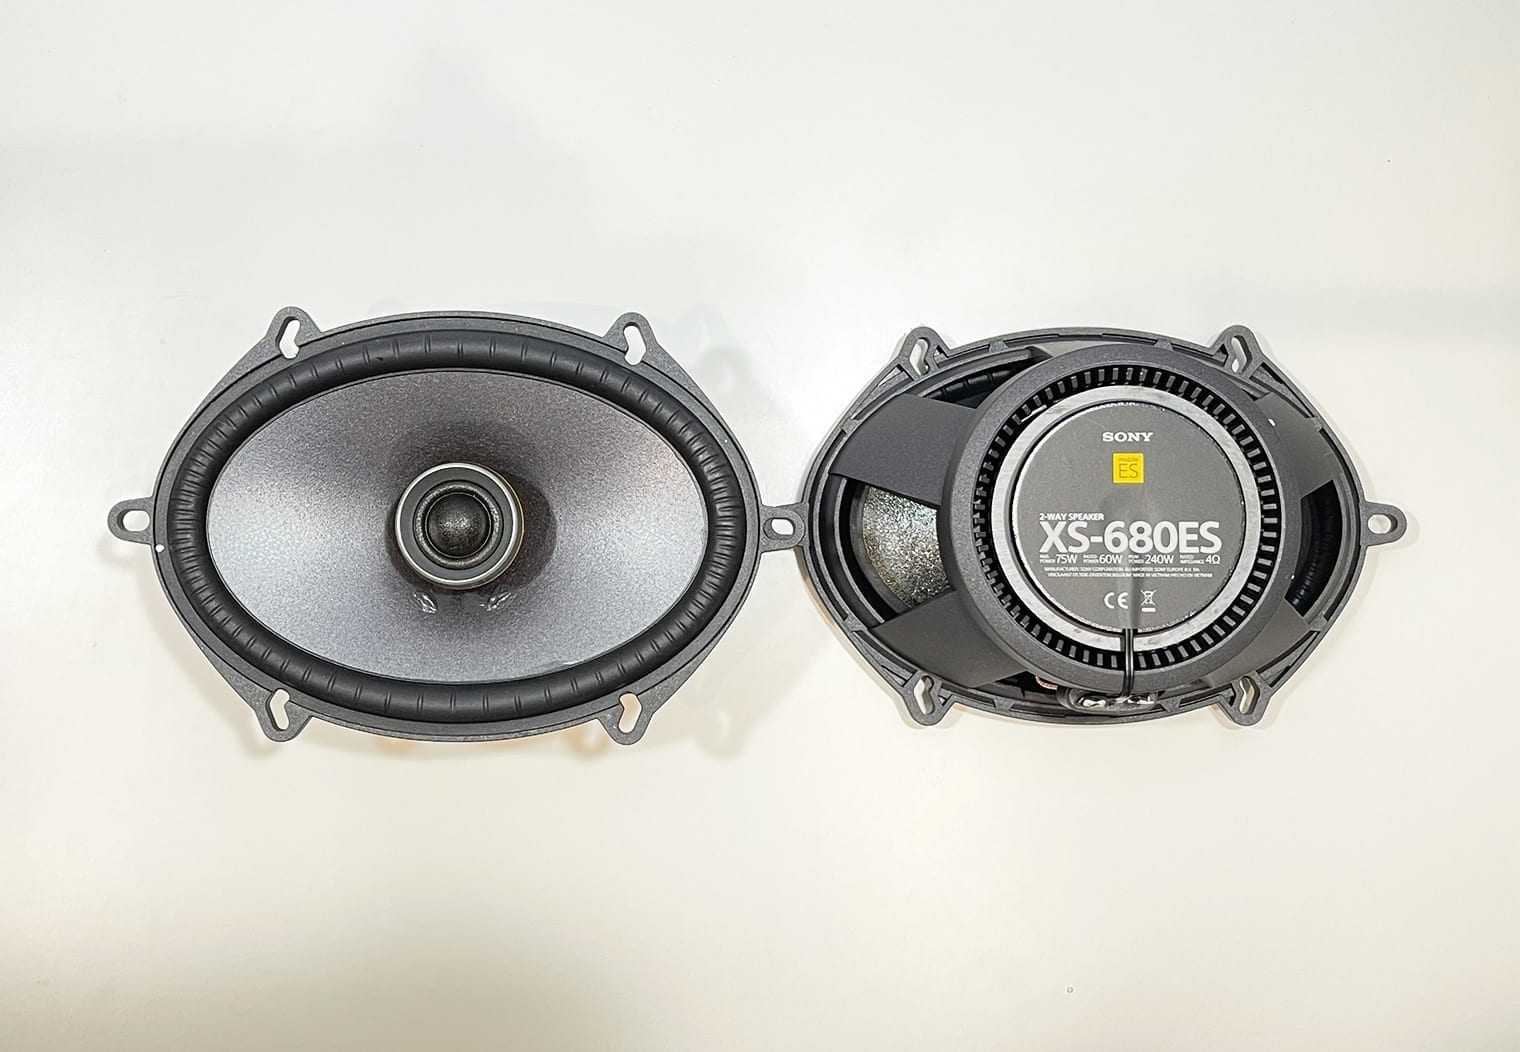 Sony XS-680ES front and back image of the speaker